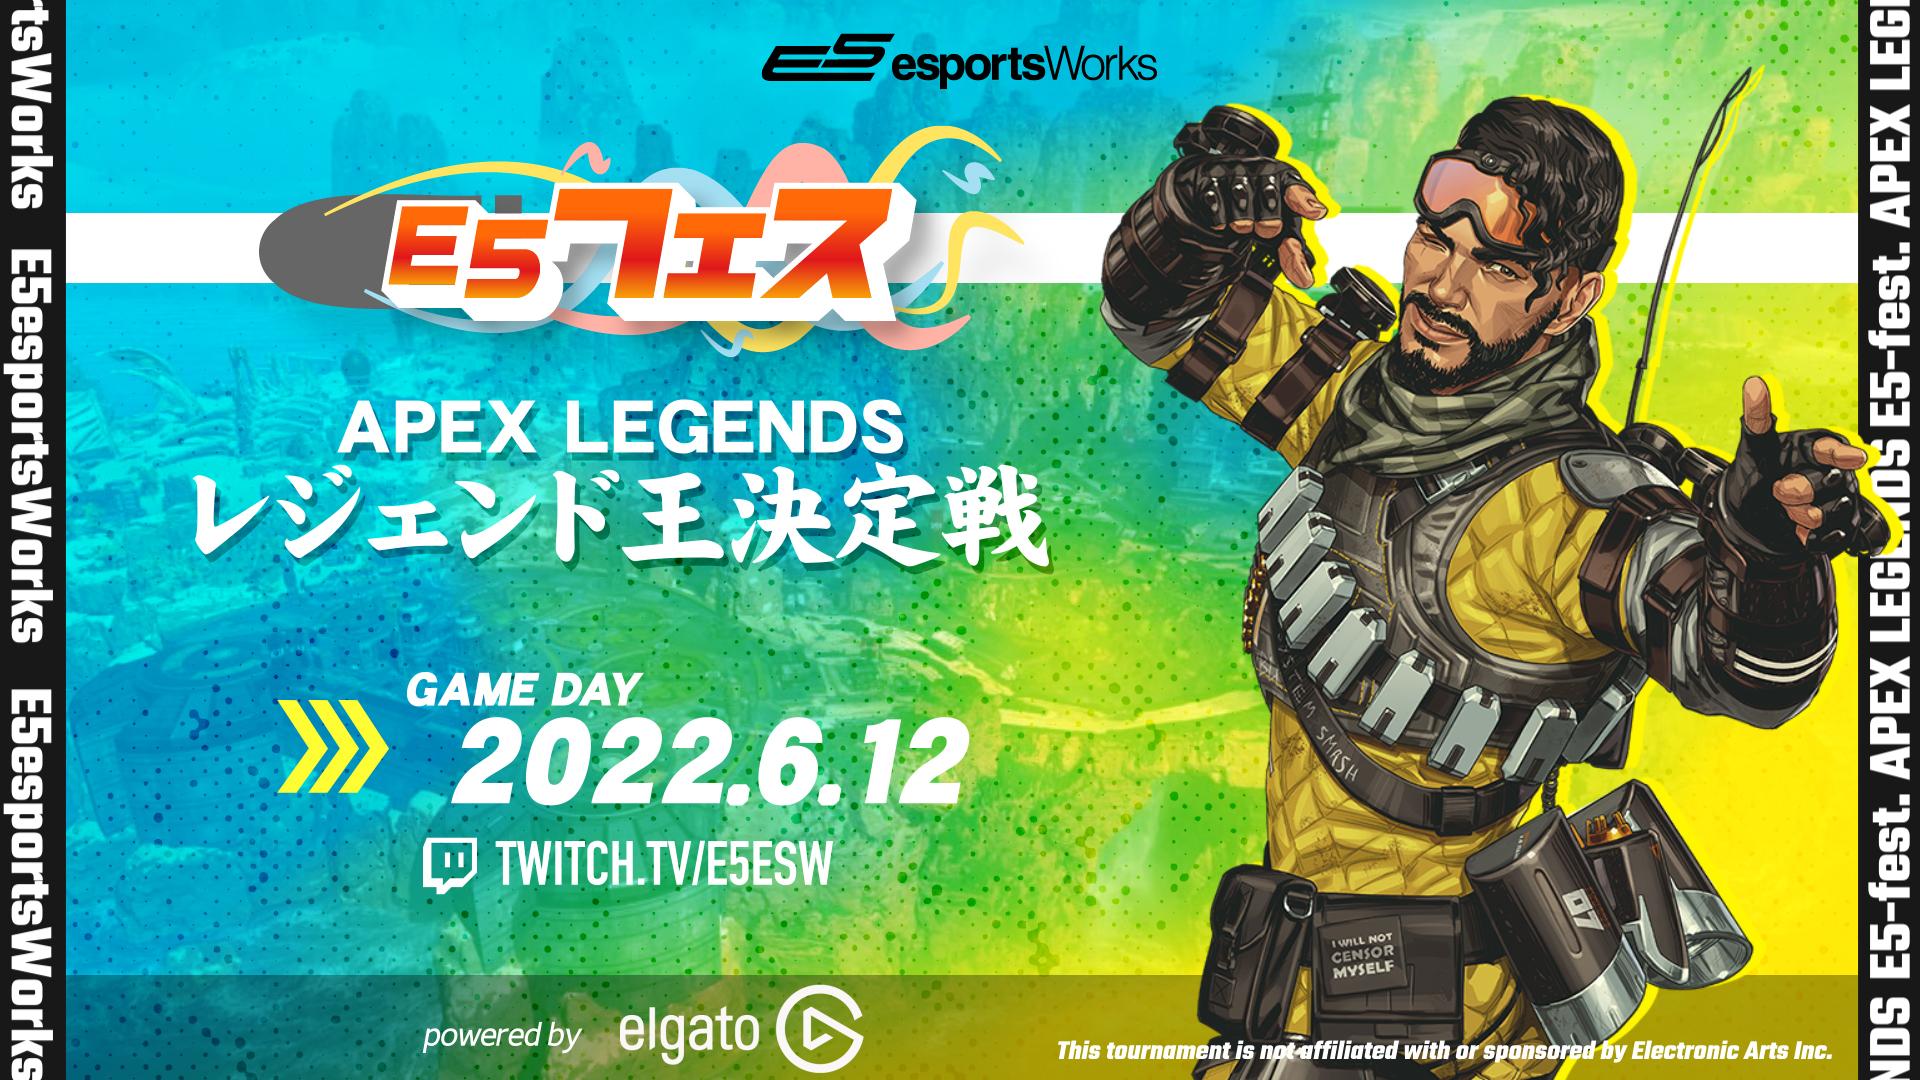 E5フェス Apex Legends 第2回 レジェンド王決定戦 powered by Elgato feature image